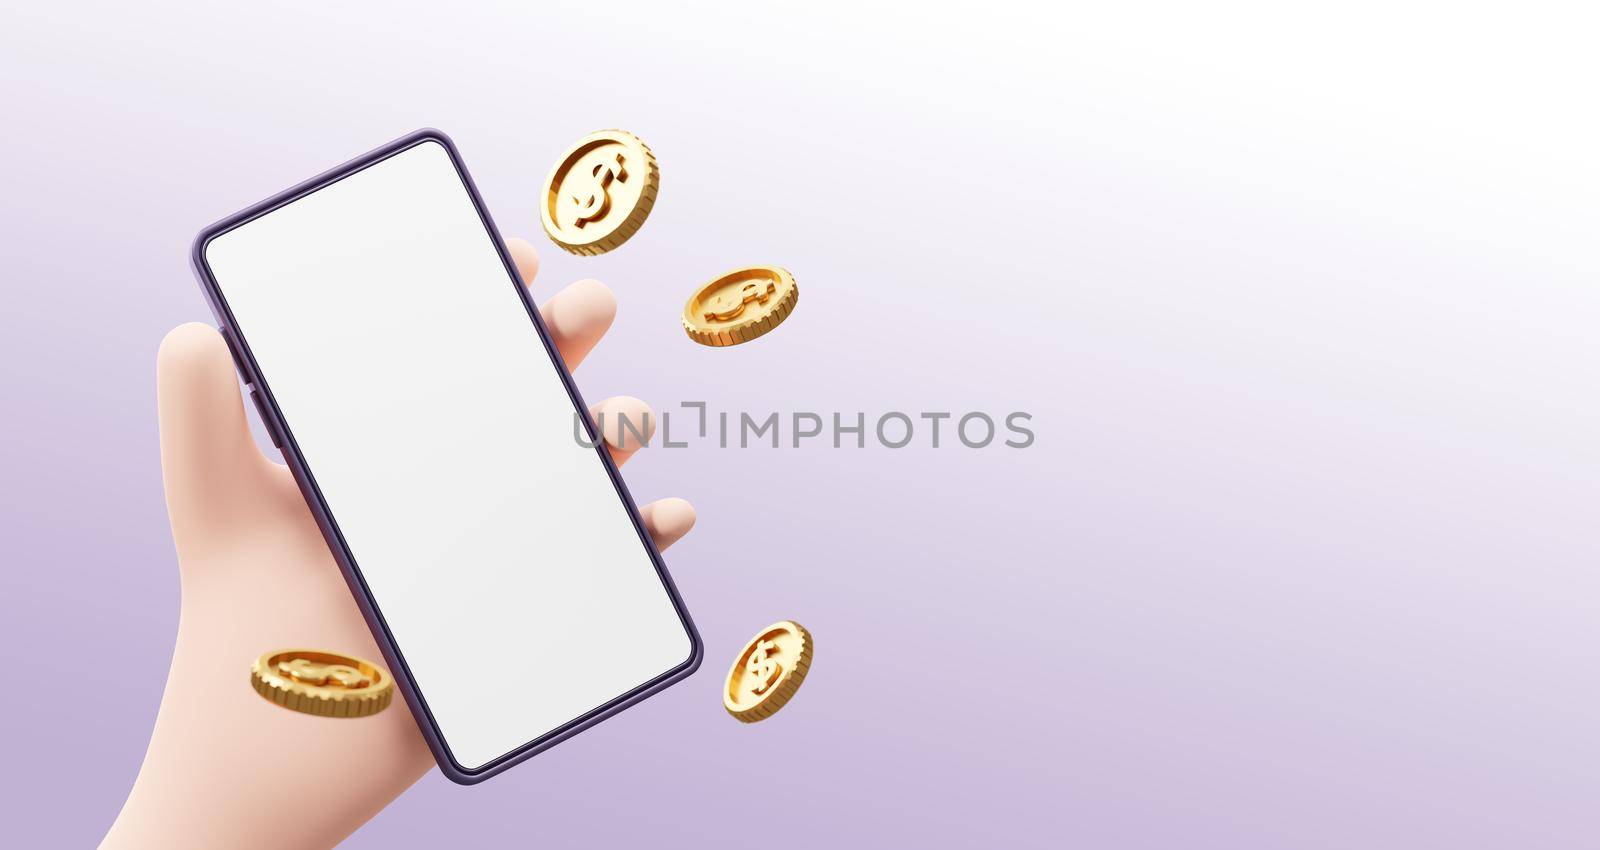 Hand holding mobile phone with gold coin 3D render